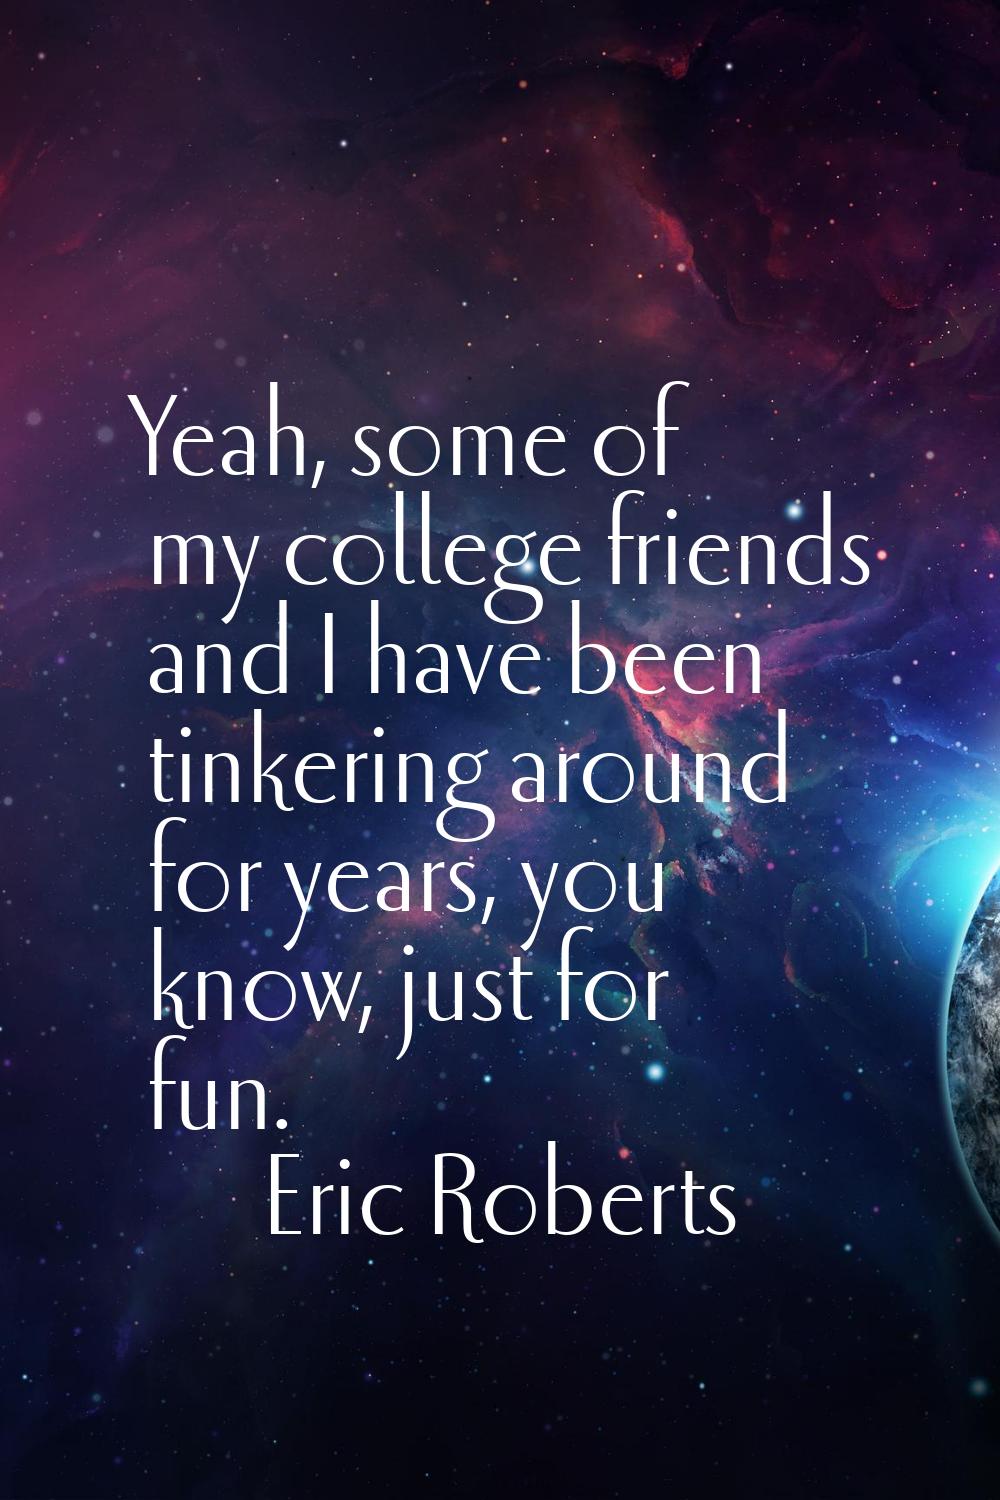 Yeah, some of my college friends and I have been tinkering around for years, you know, just for fun